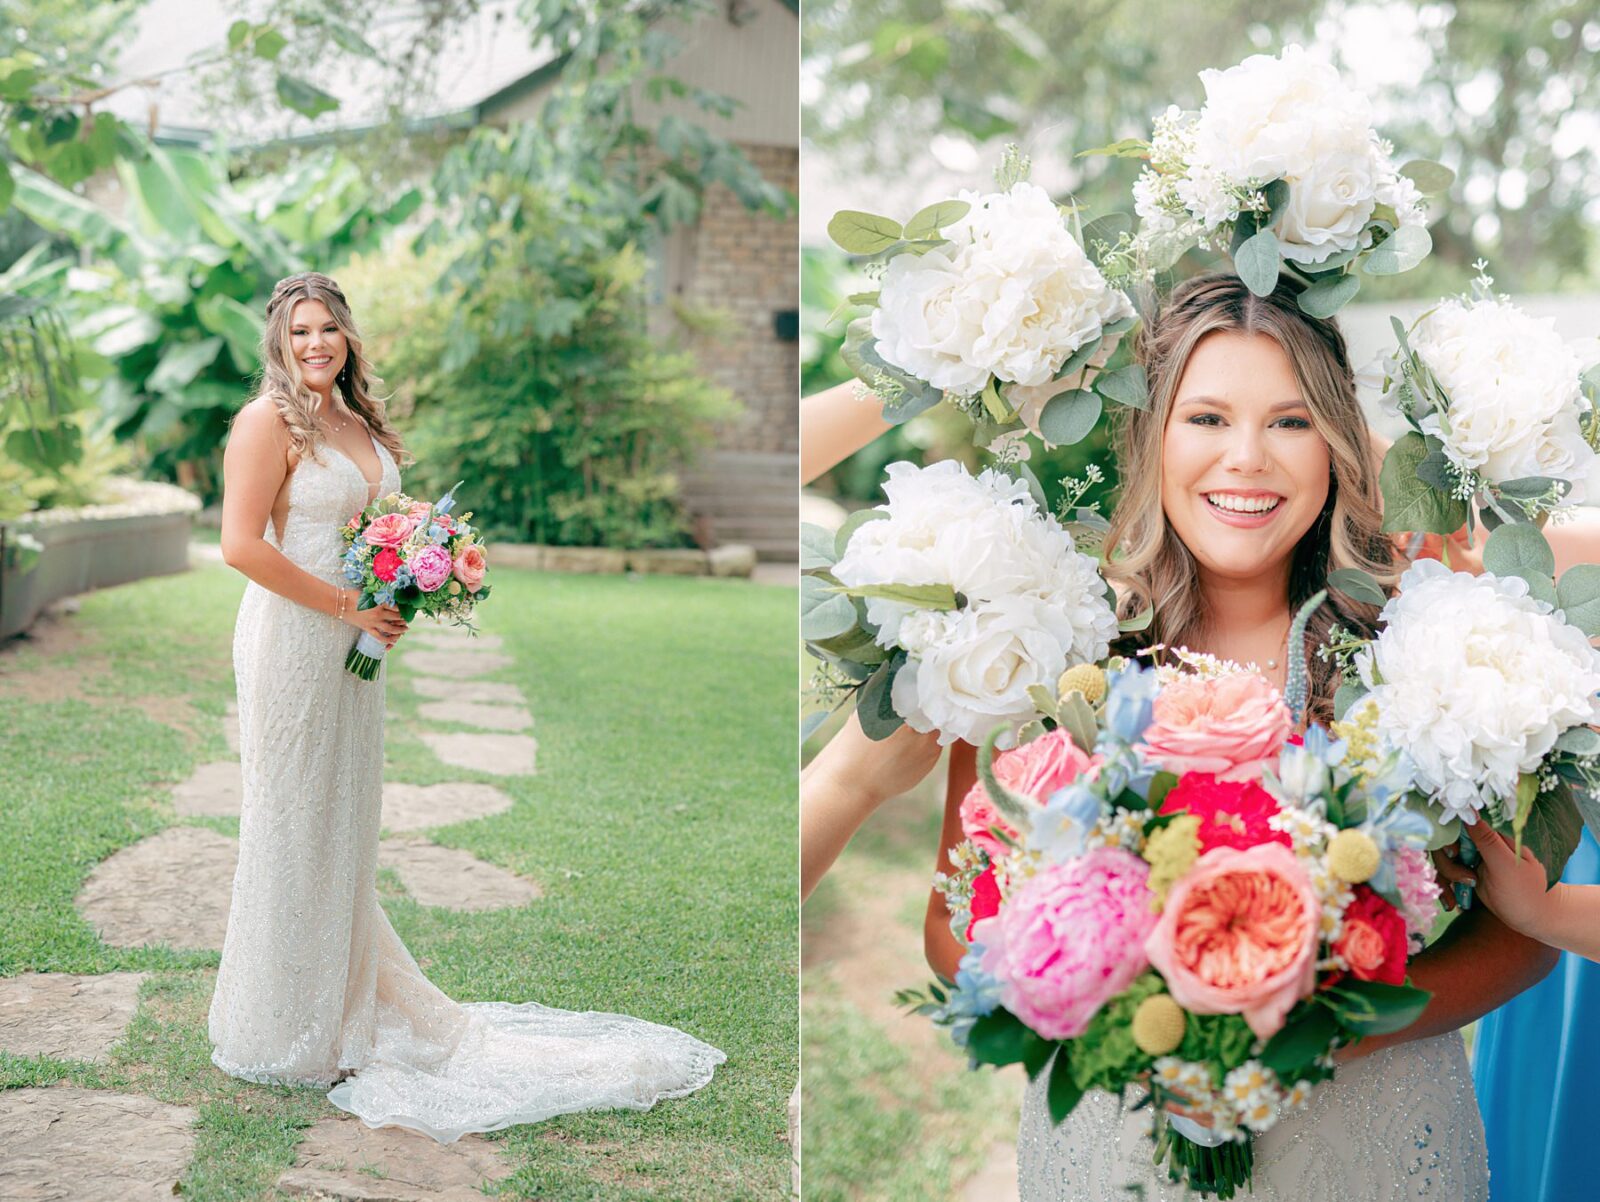 bridal portrait with bouquets in circle around bride's face, Austin Wedding at Hummingbird House, with wedding photos by Tara Lyons Photography. Other vendors: Mistique Makeup, Cana Events, Twin Flame Events, Simply Chic Event Rentals, Live Oak Photo Booth